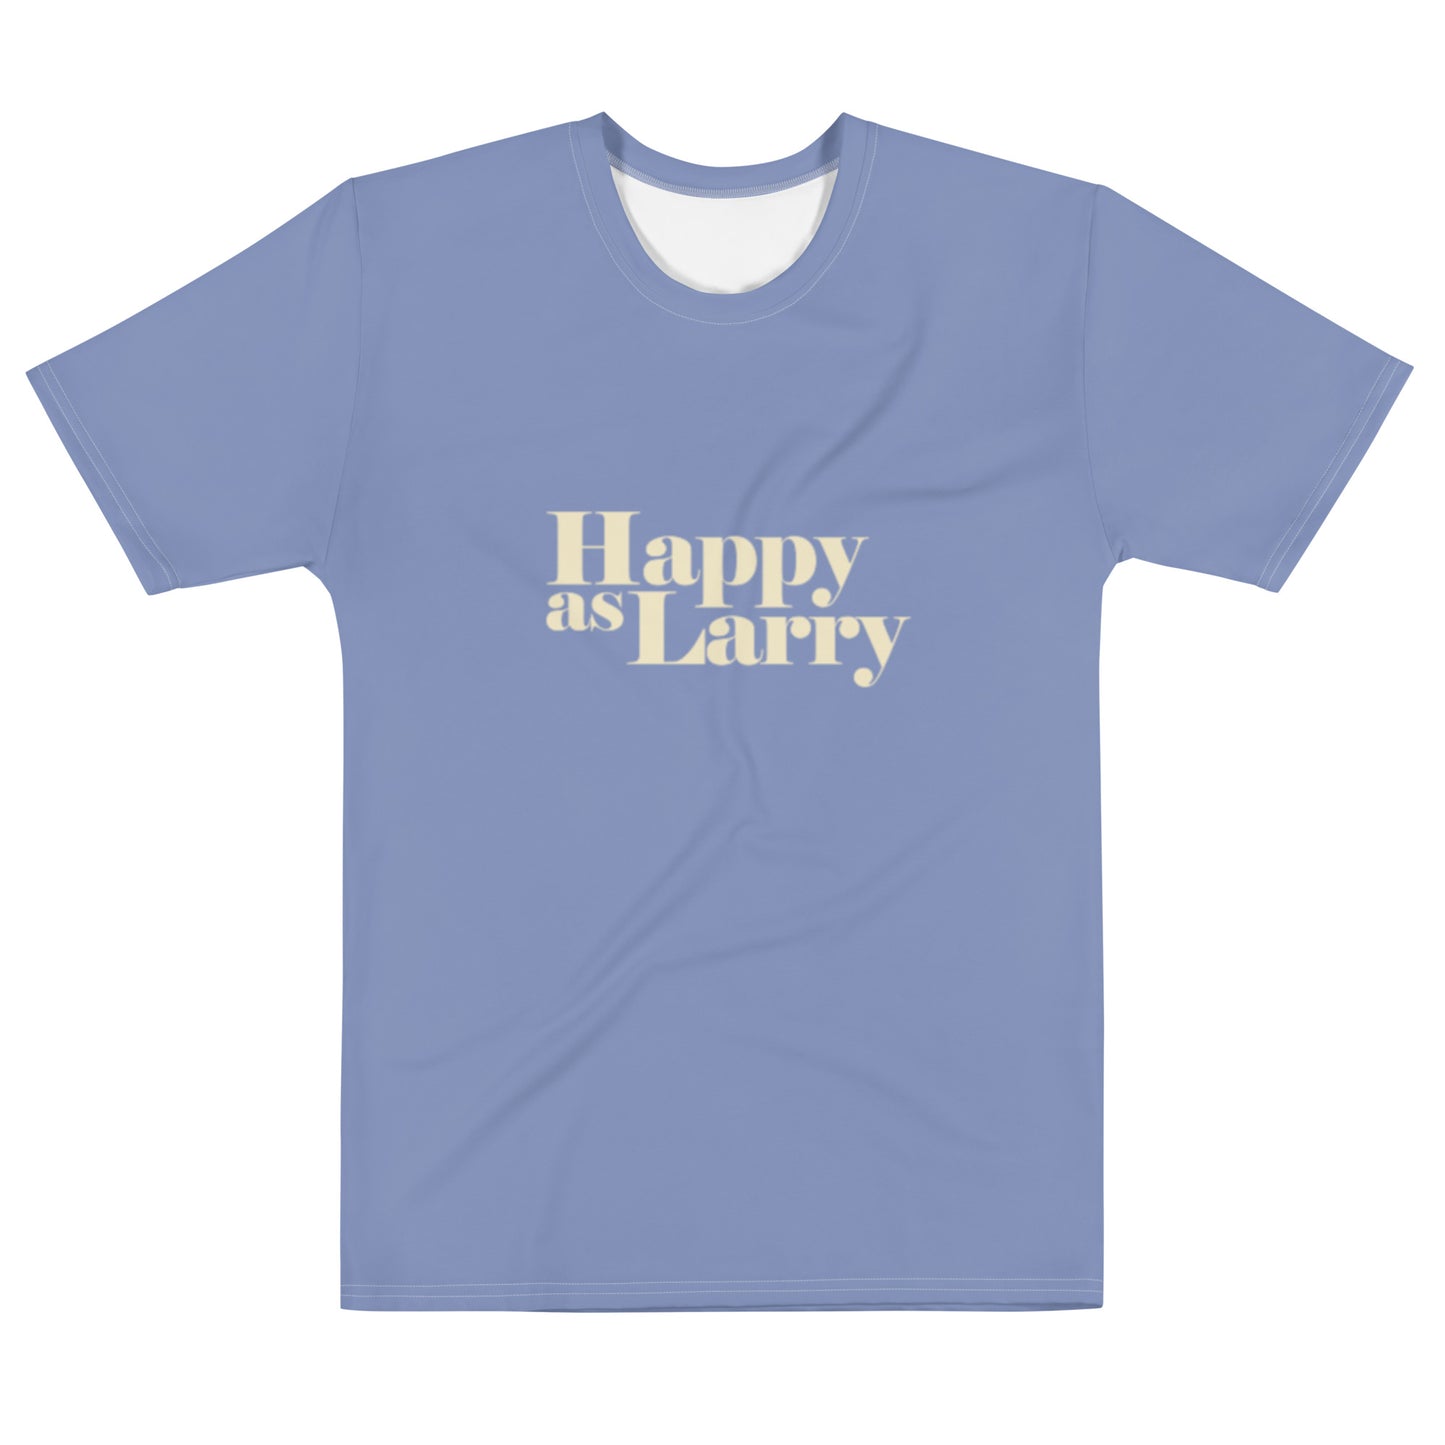 Happy as Larry - Sustainably Made Men's Short Sleeve Tee